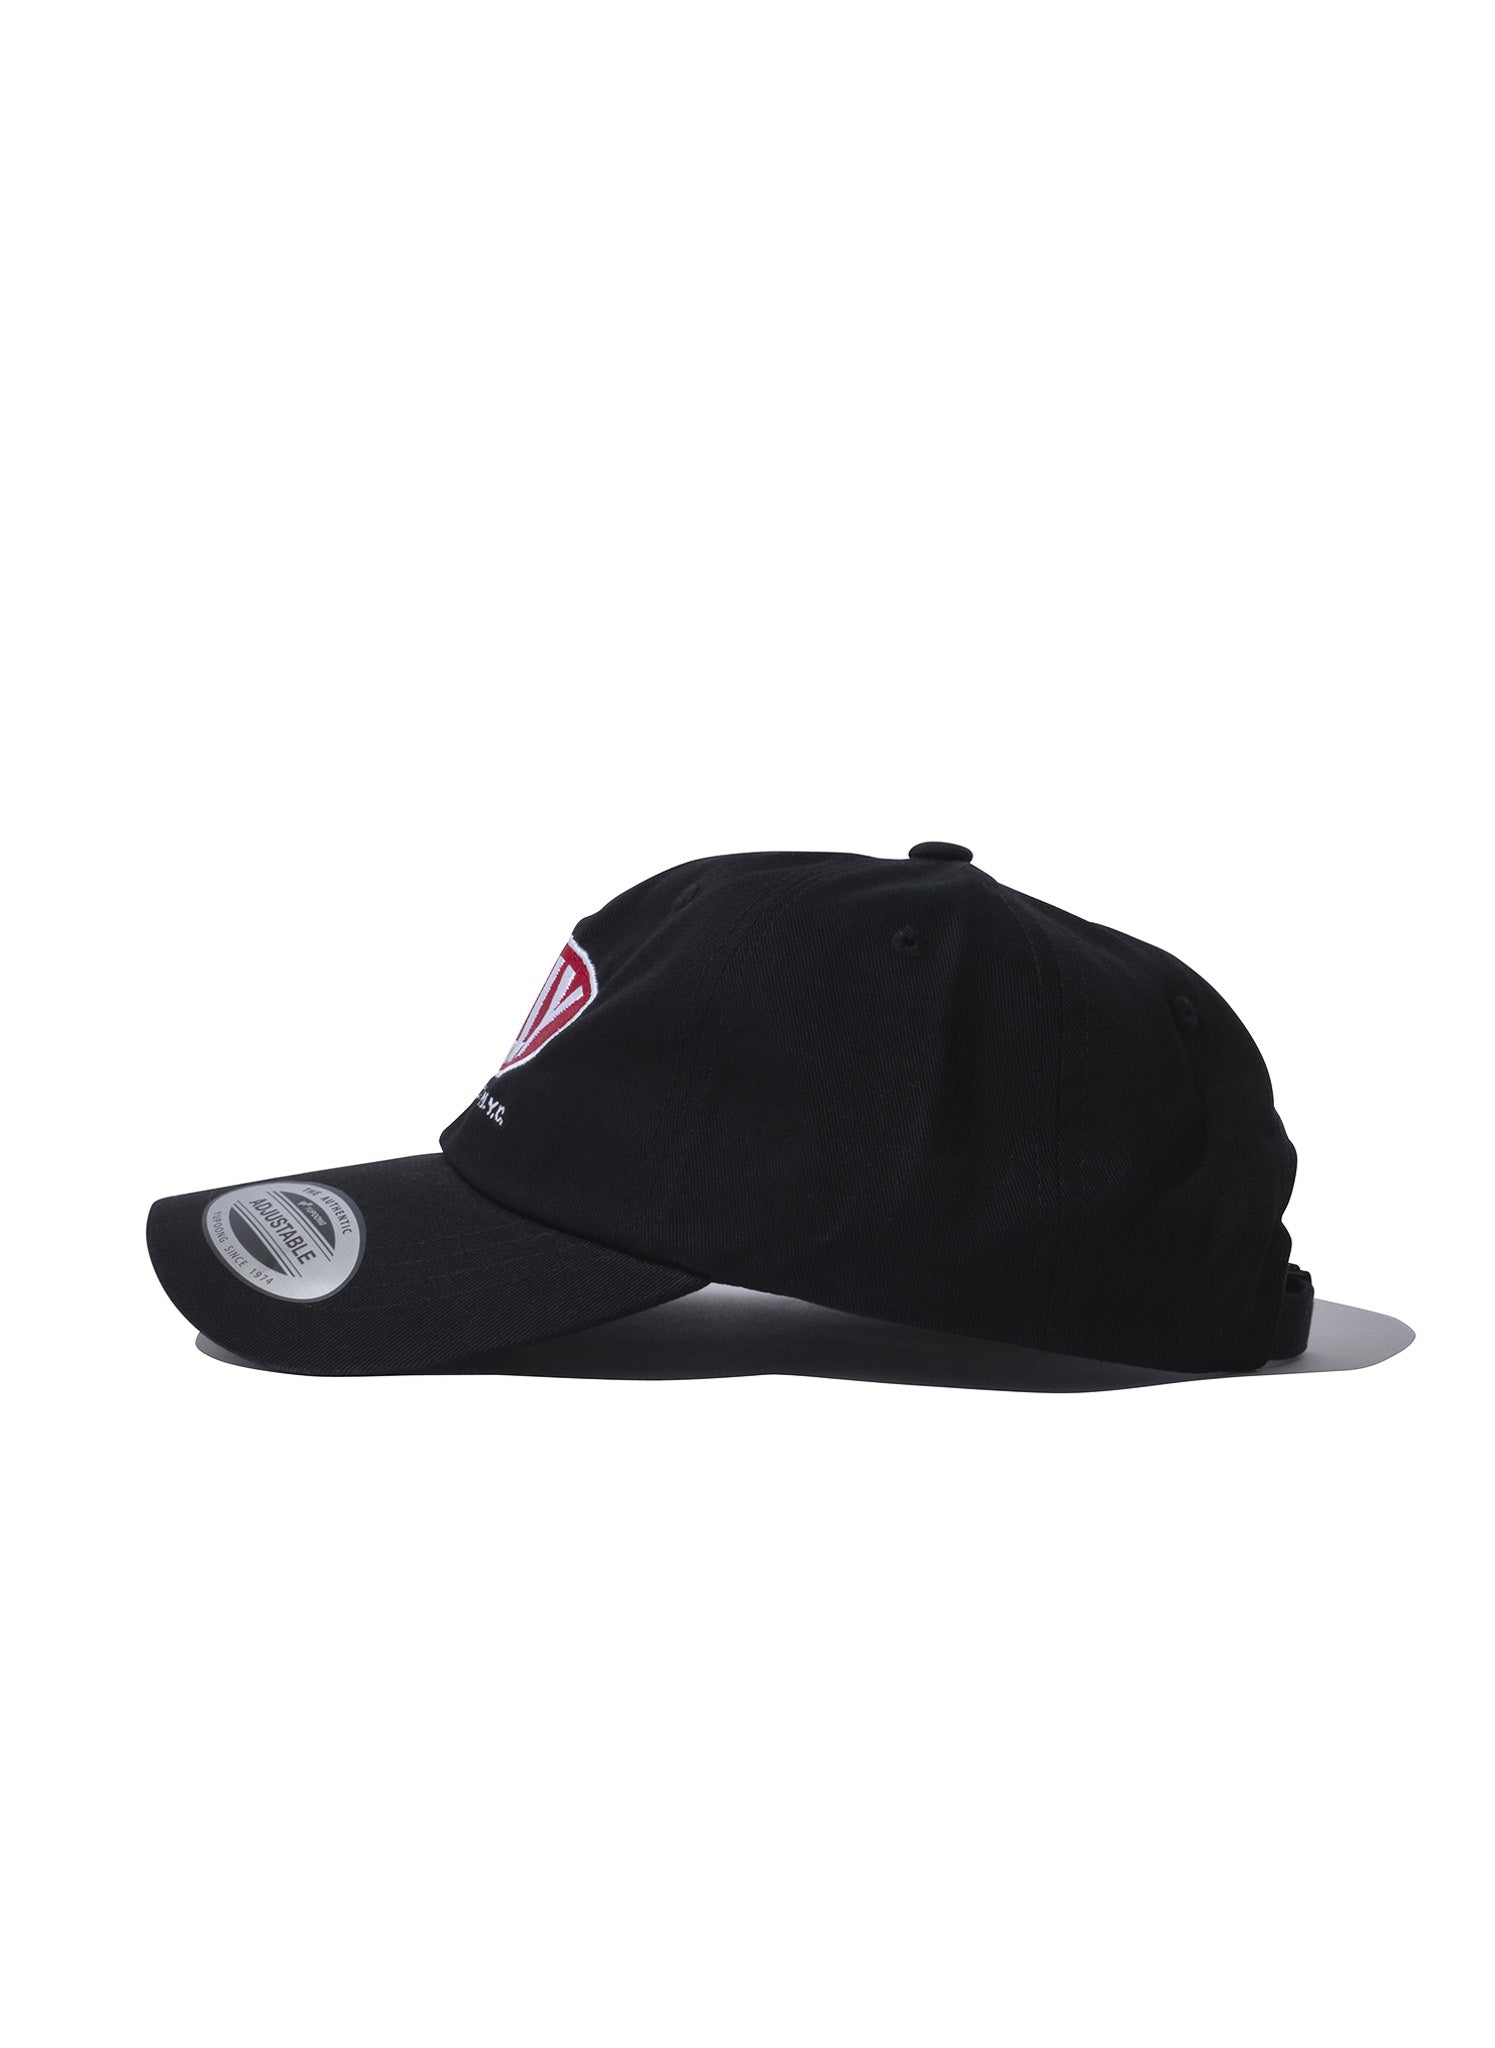 <span style="color: #f50b0b;">Last One</span> WILLY CHAVARRIA / WILLY LOGO CAP 2 BLACK